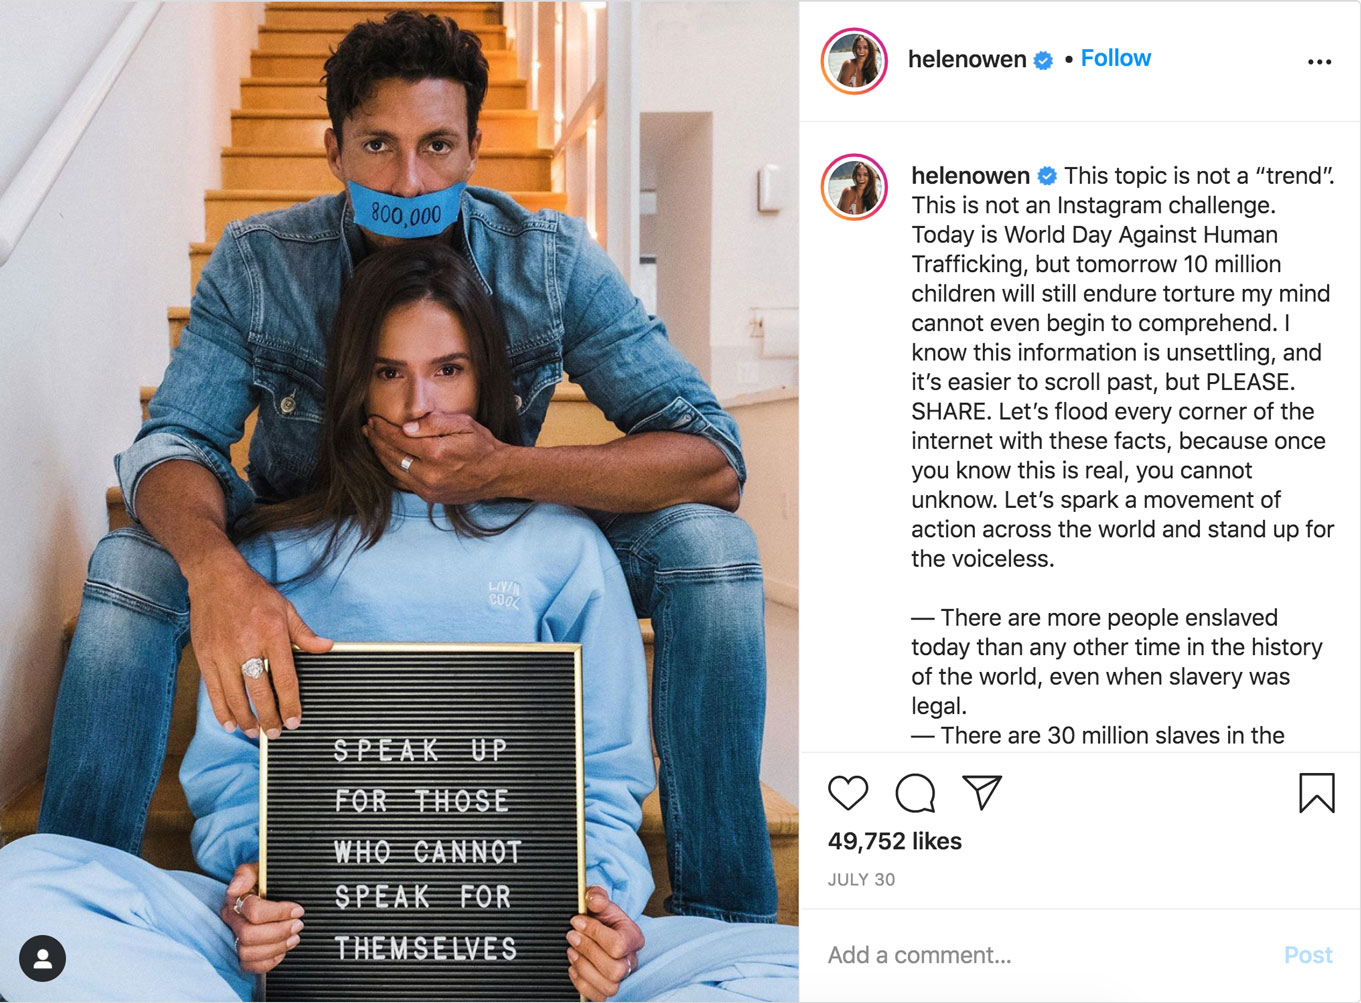 Helen Owen's Instagram post #SaveTheChildren - This topic is not a "trend". This is not an Instagram challenge. Today is World Day Against Human Trafficking, but tomorrow 10 million children will still endure torture my mind cannot even begin to comprehen